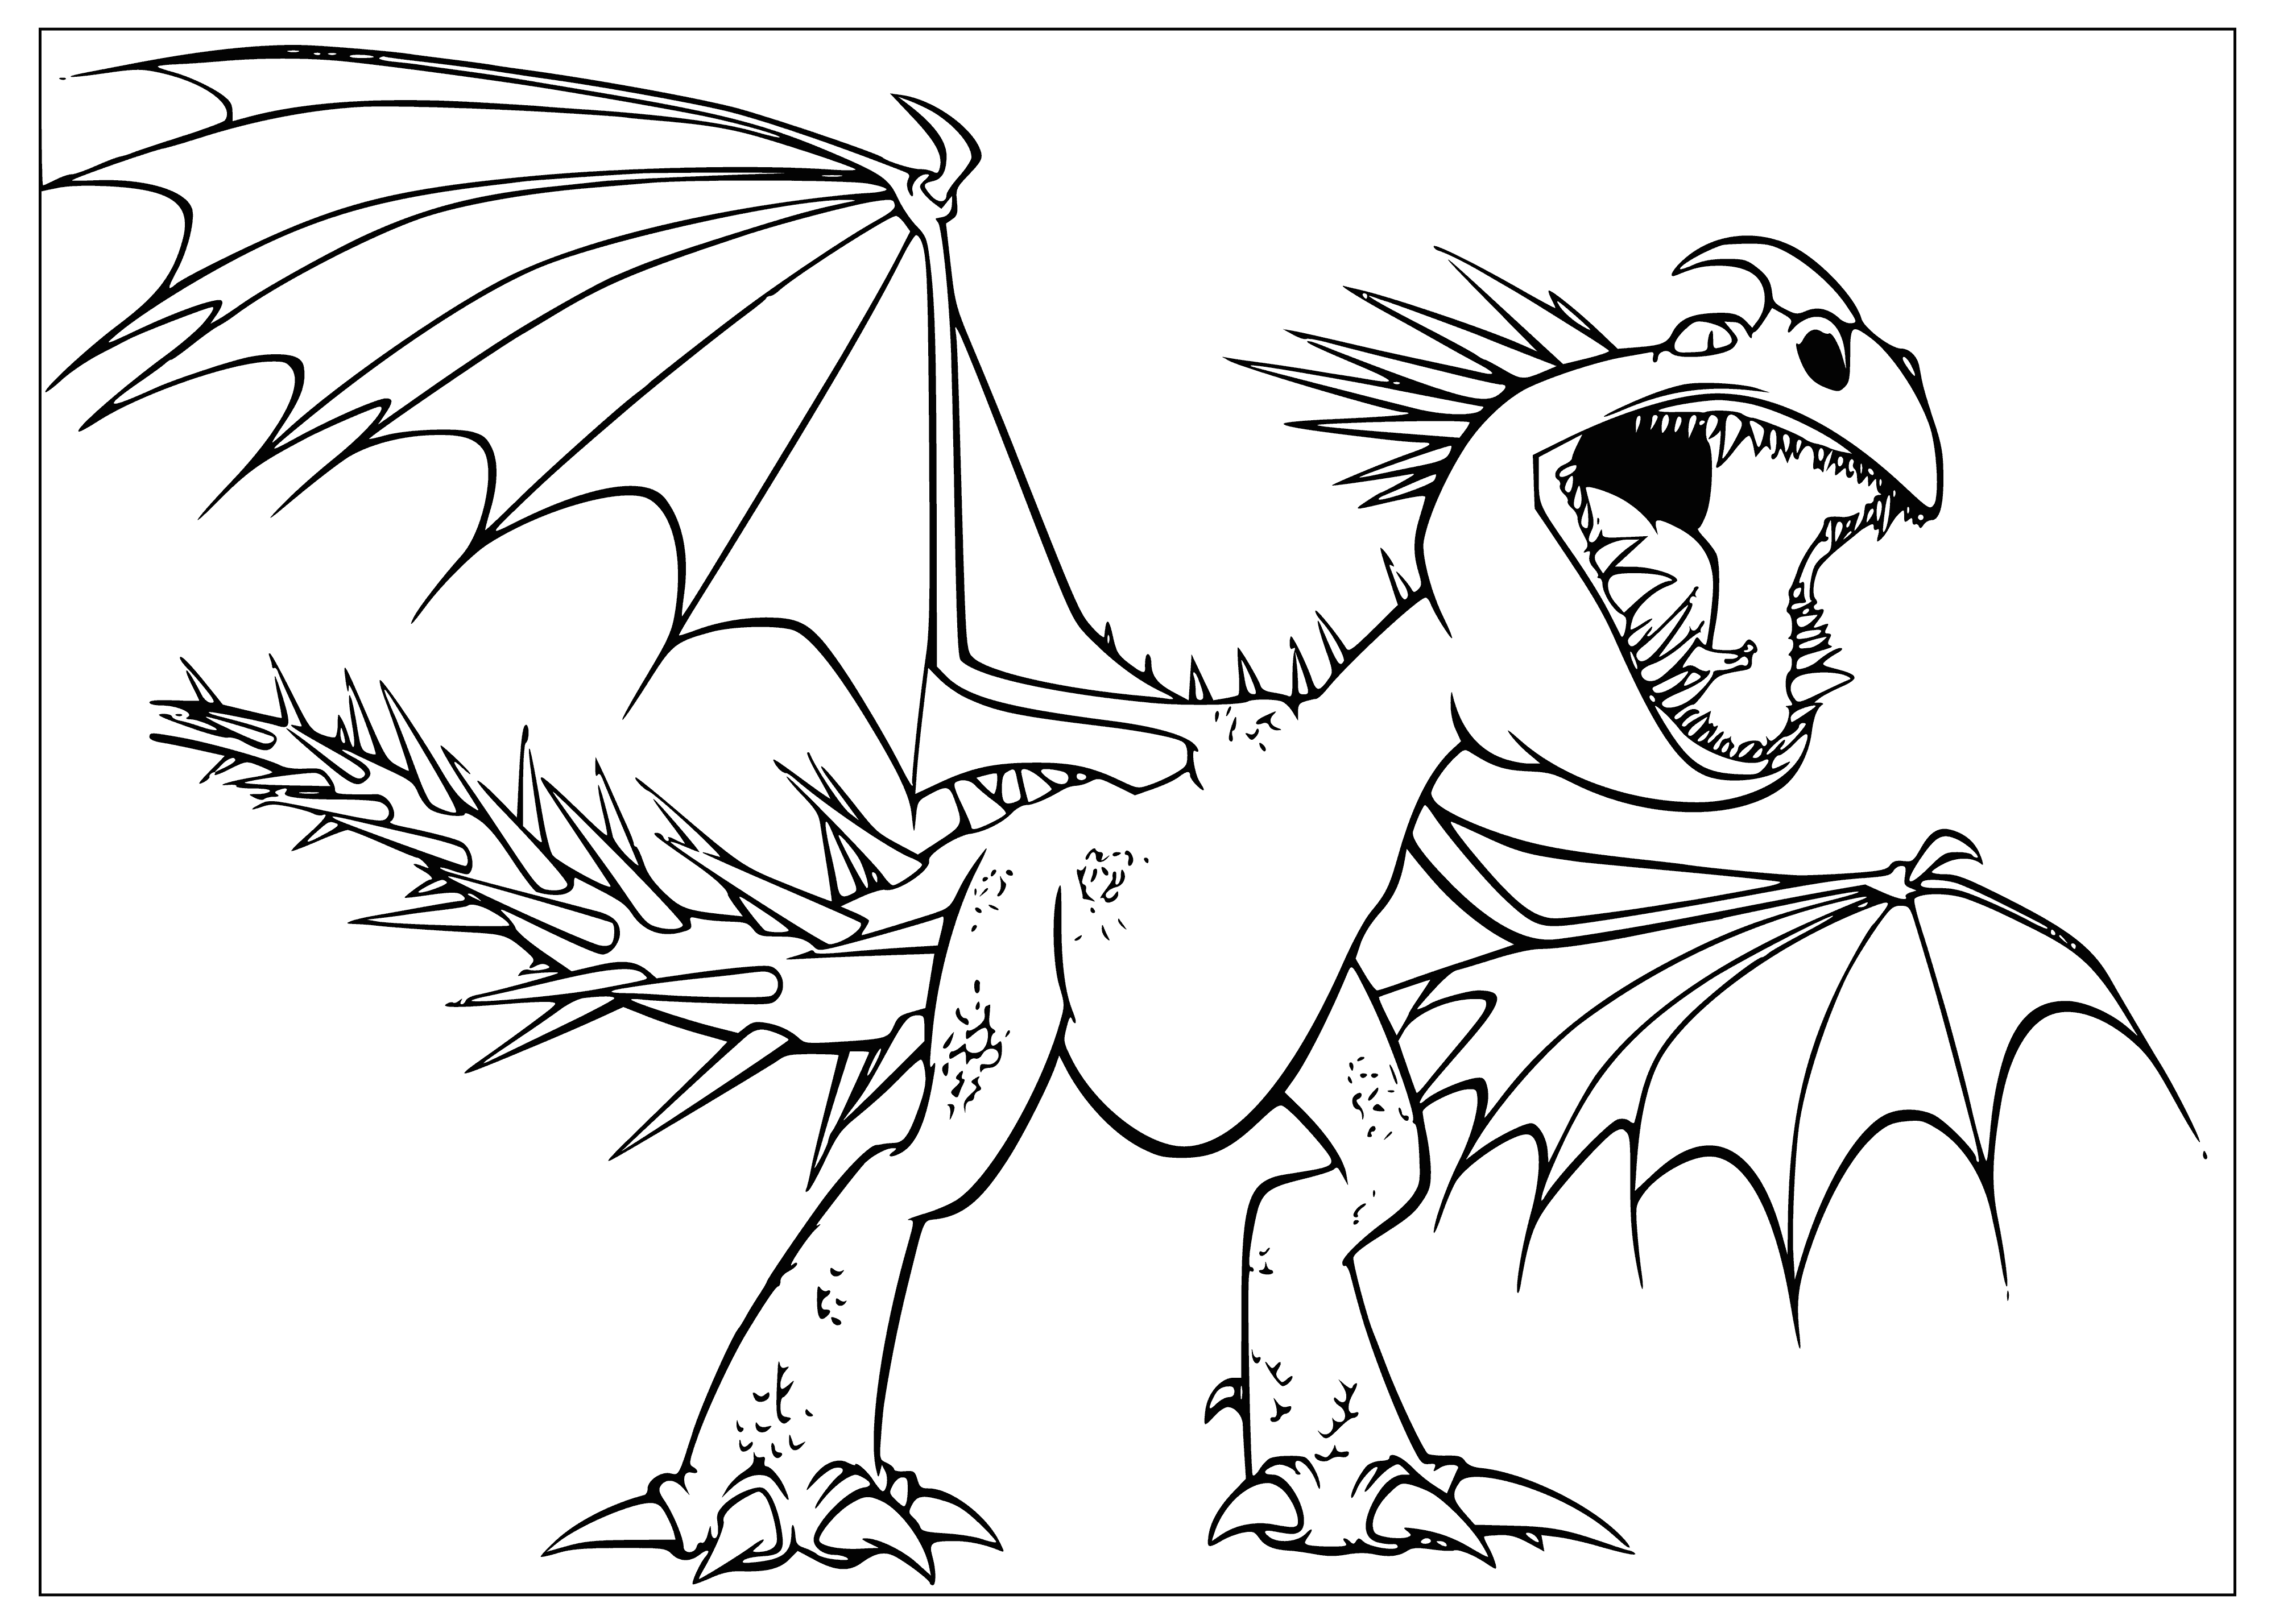 Vicious serpentine coloring page